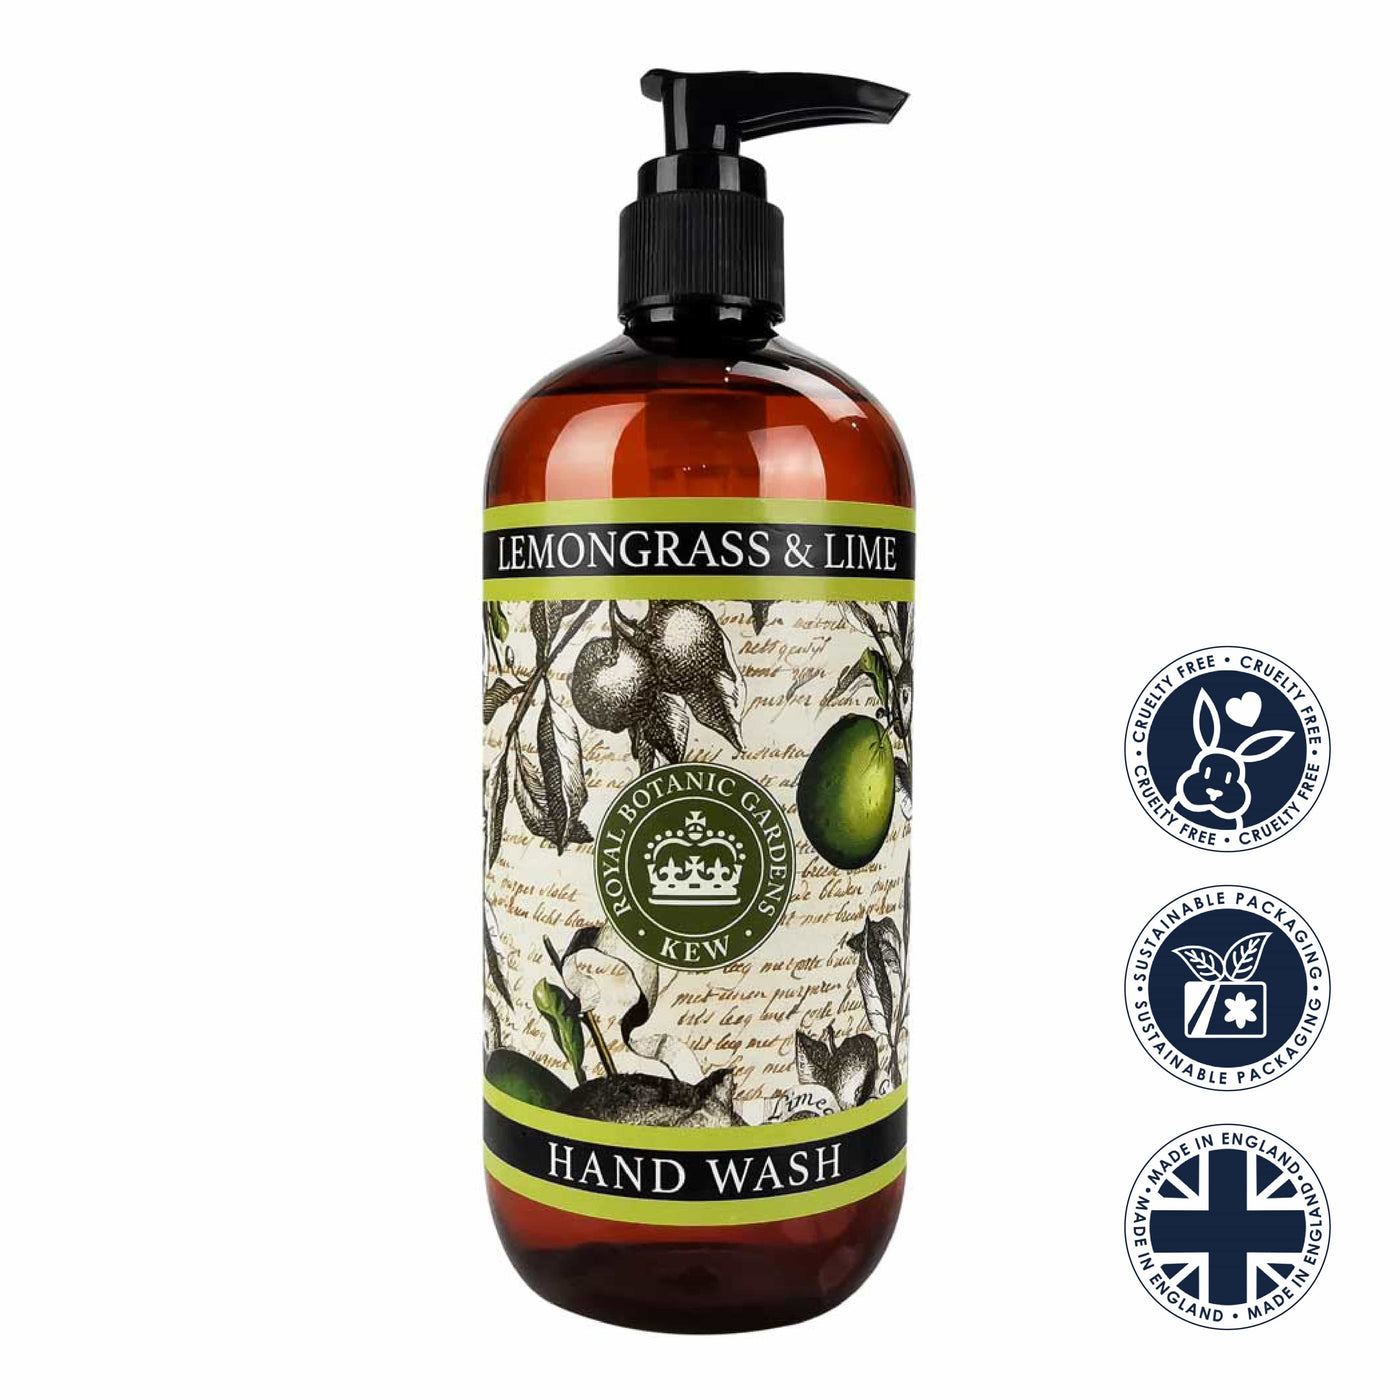 Lemongrass & Lime Hand Wash - Kew Gardens Collection from our Liquid Hand & Body Soap collection by The English Soap Company